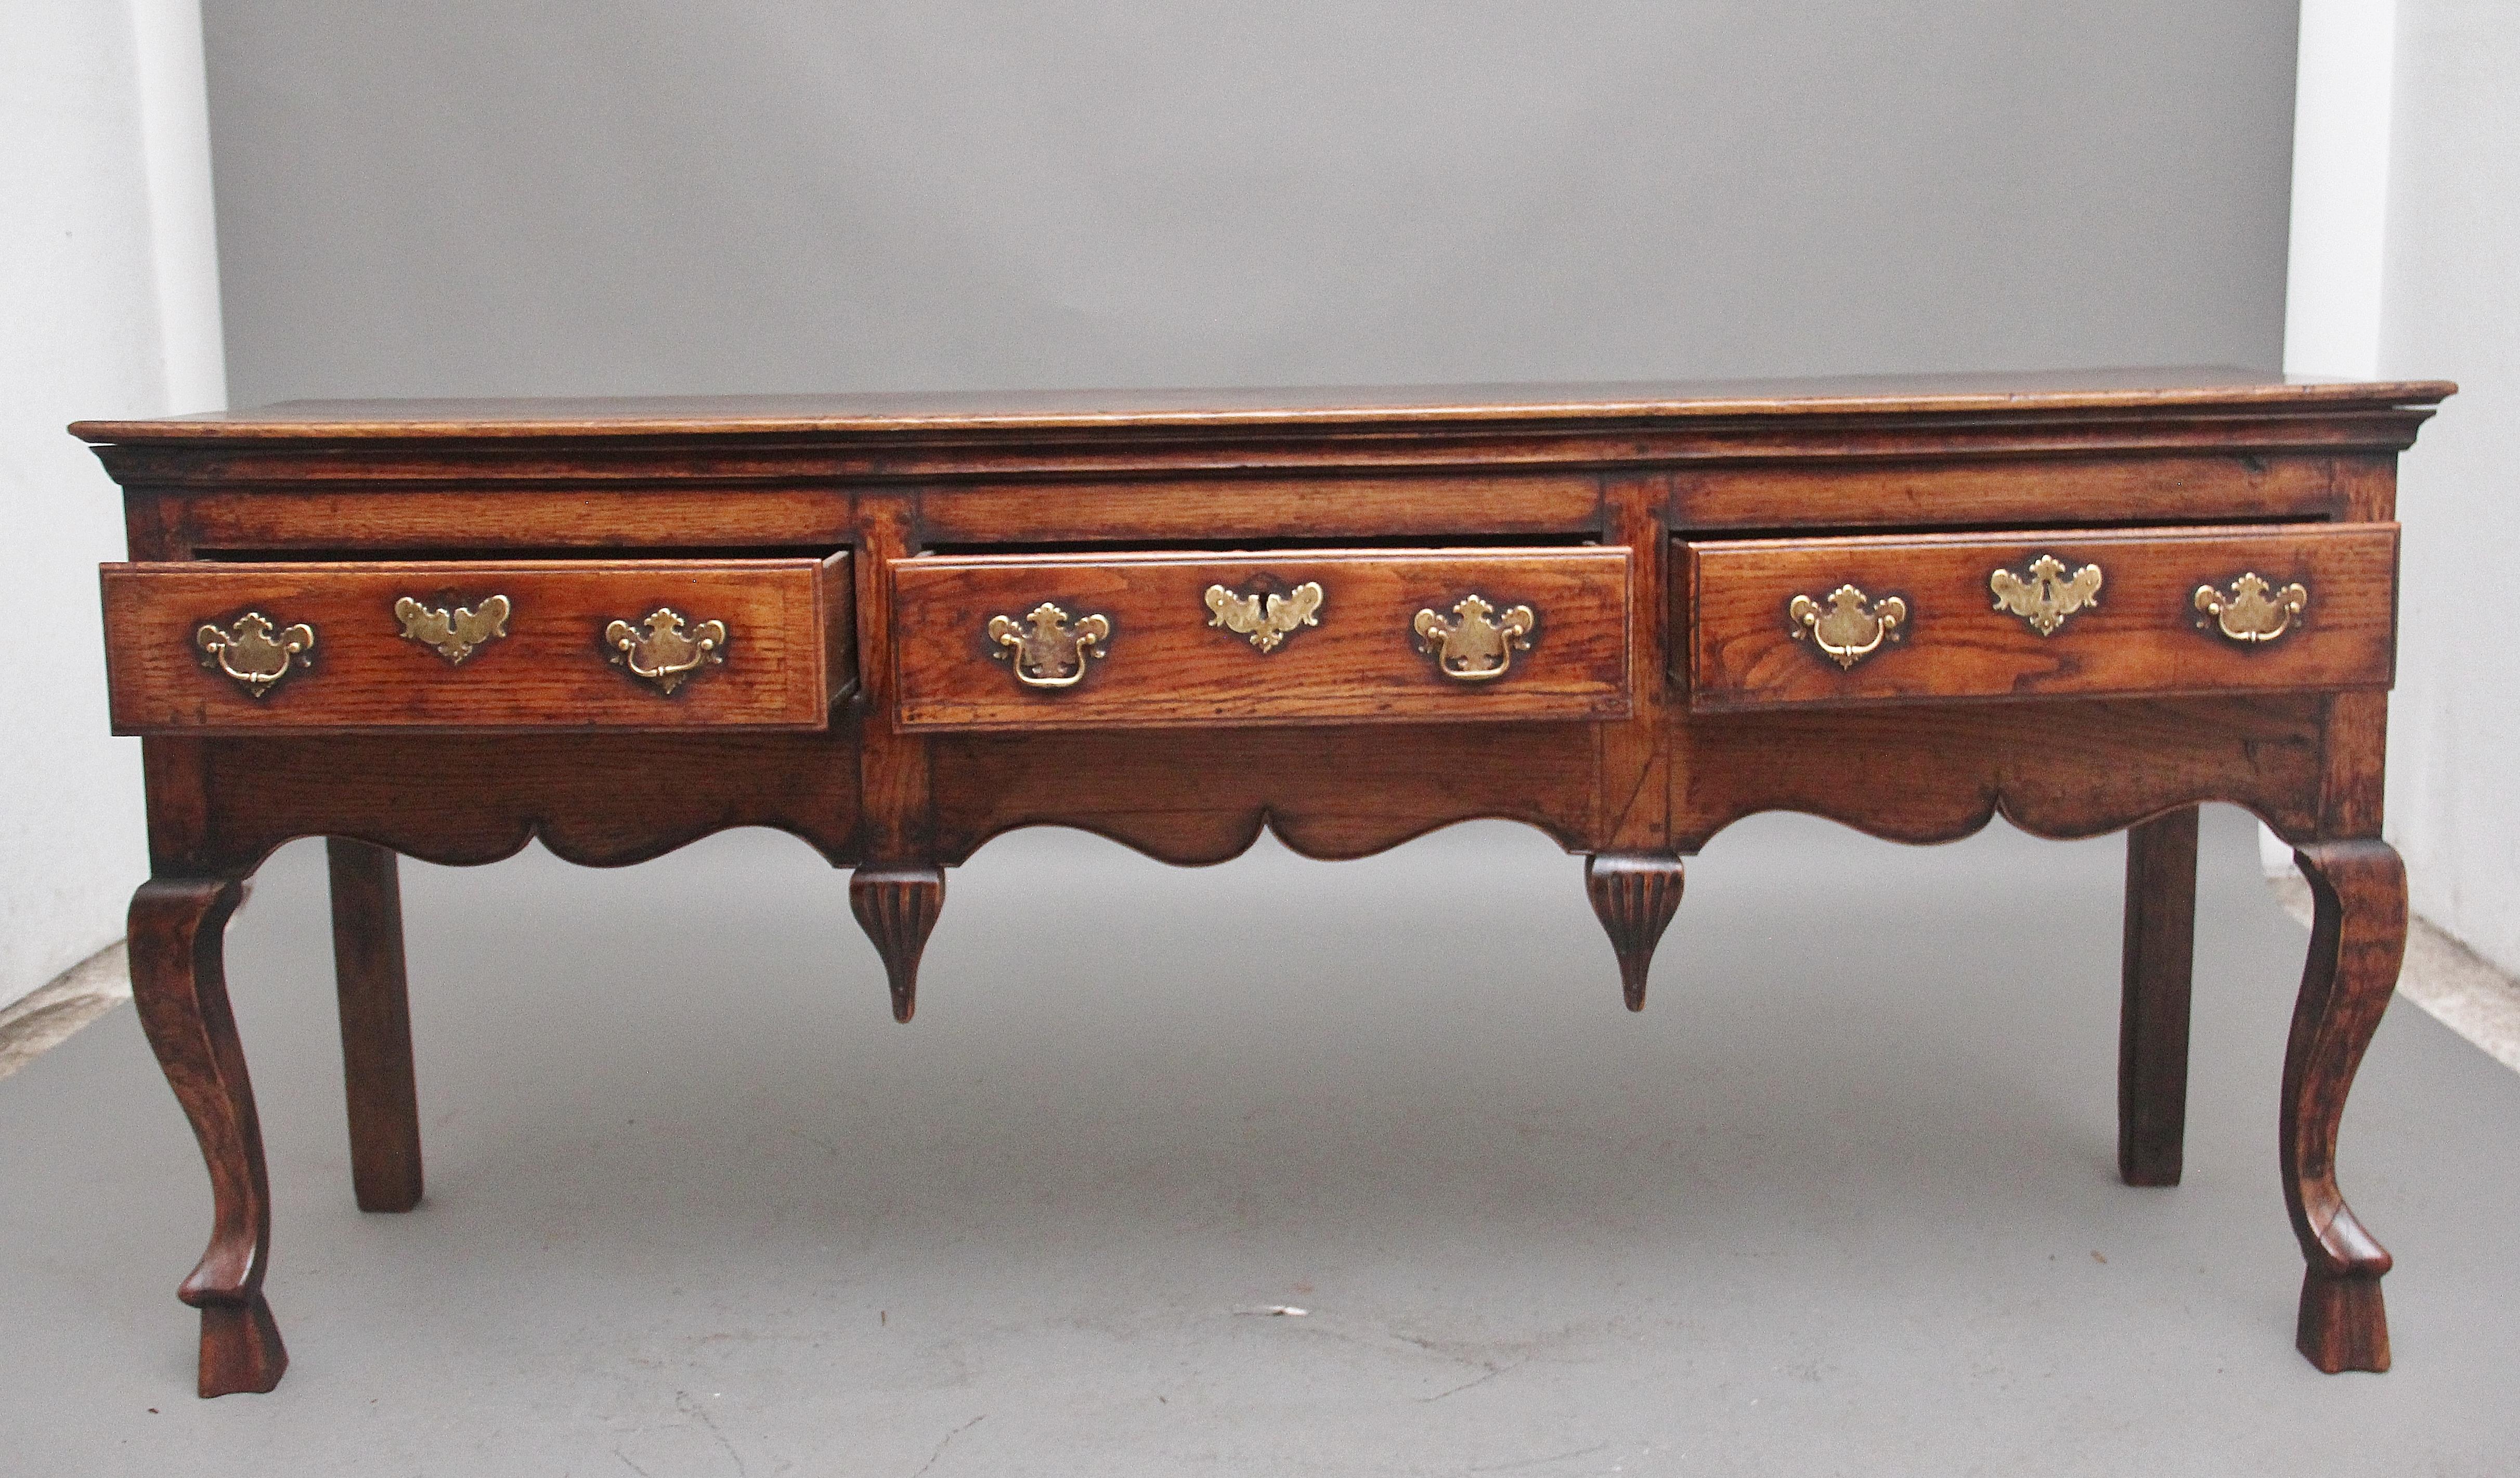 A superb quality and rare early 18th Century oak dresser, the moulded edge top above three drawers with the original brass handles and escutcheons, a wonderfully shaped frieze decorated with inverted finials, supported on elegant cabriole legs